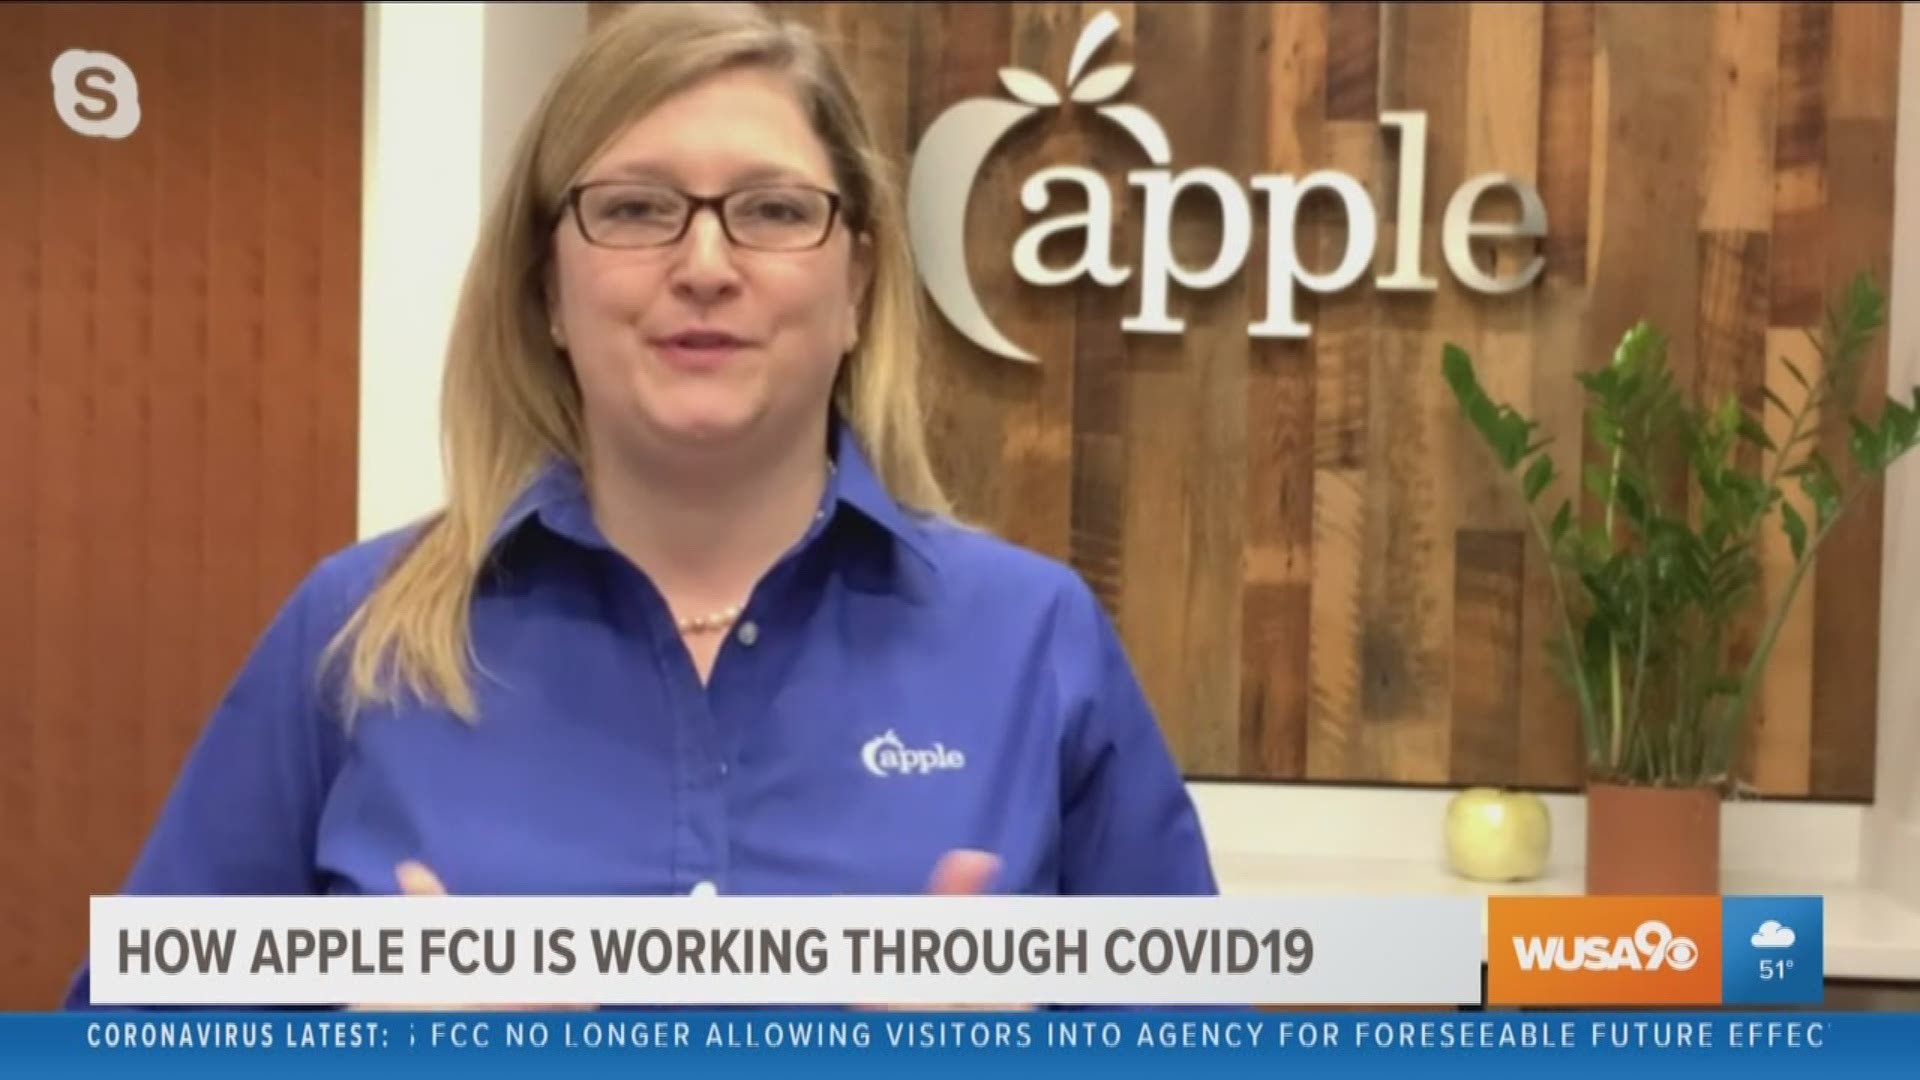 Rebecca Palmer Browne, of Apple Federal Credit Union shares how they are working through the coronavirus. This segment is sponsored by Apple Federal Credit Union.